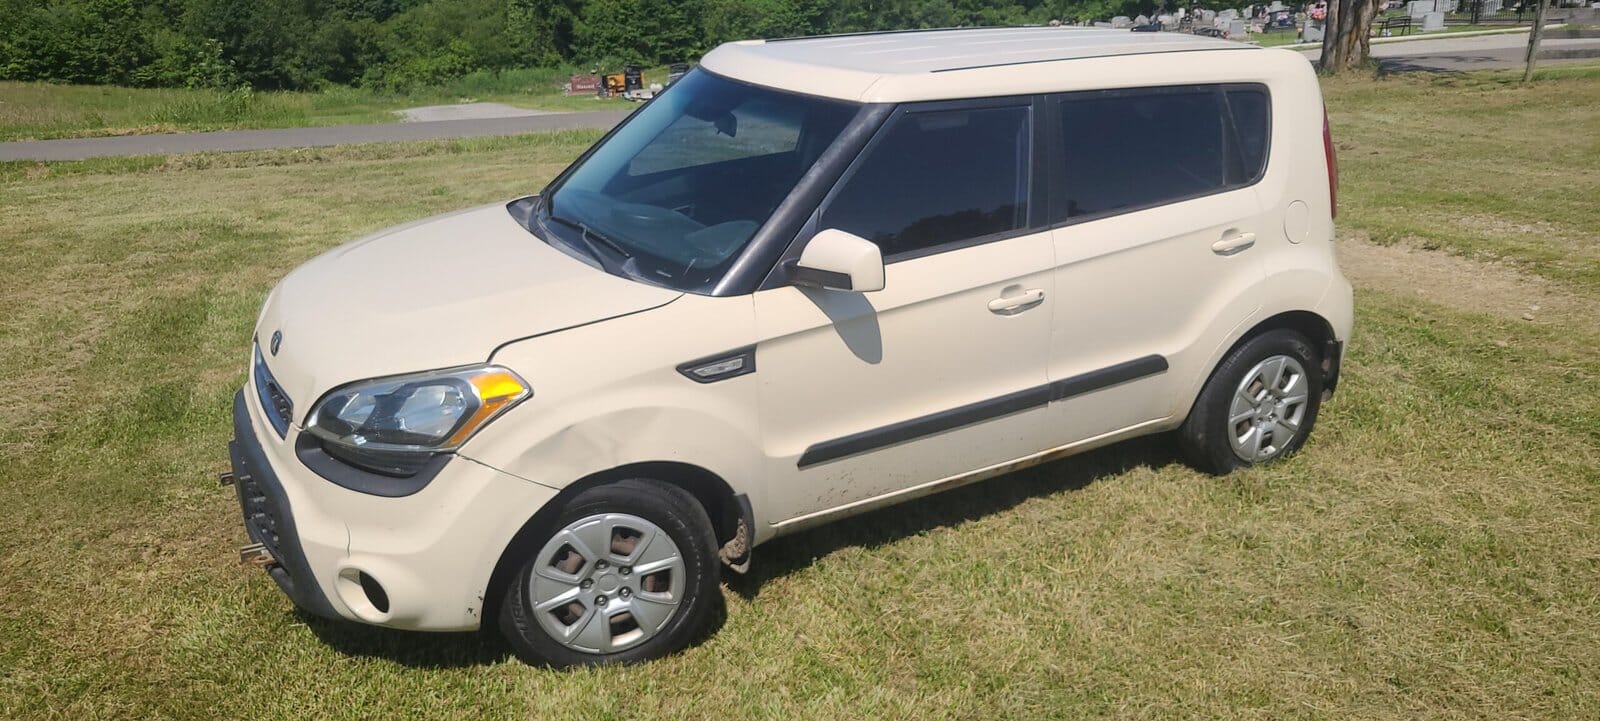 Read more about the article ***SOLD***2013 KIA SOUL BASE***SOLD***